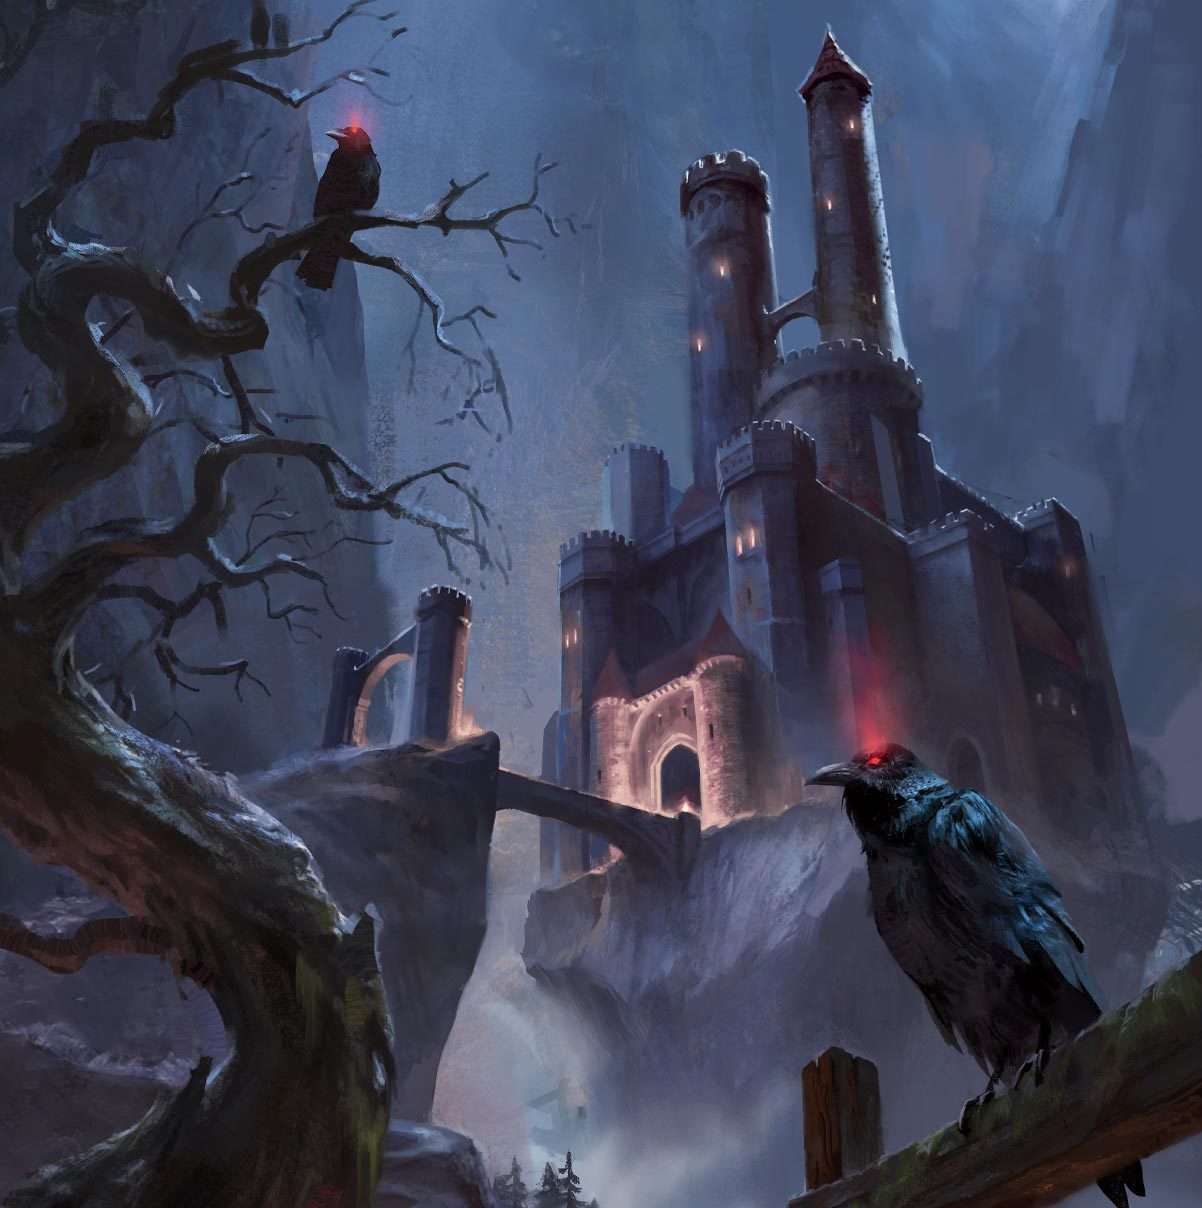 castle ravenloft is in the background of the shot with crows sitting menacingly on the branches of dead trees in the foreground